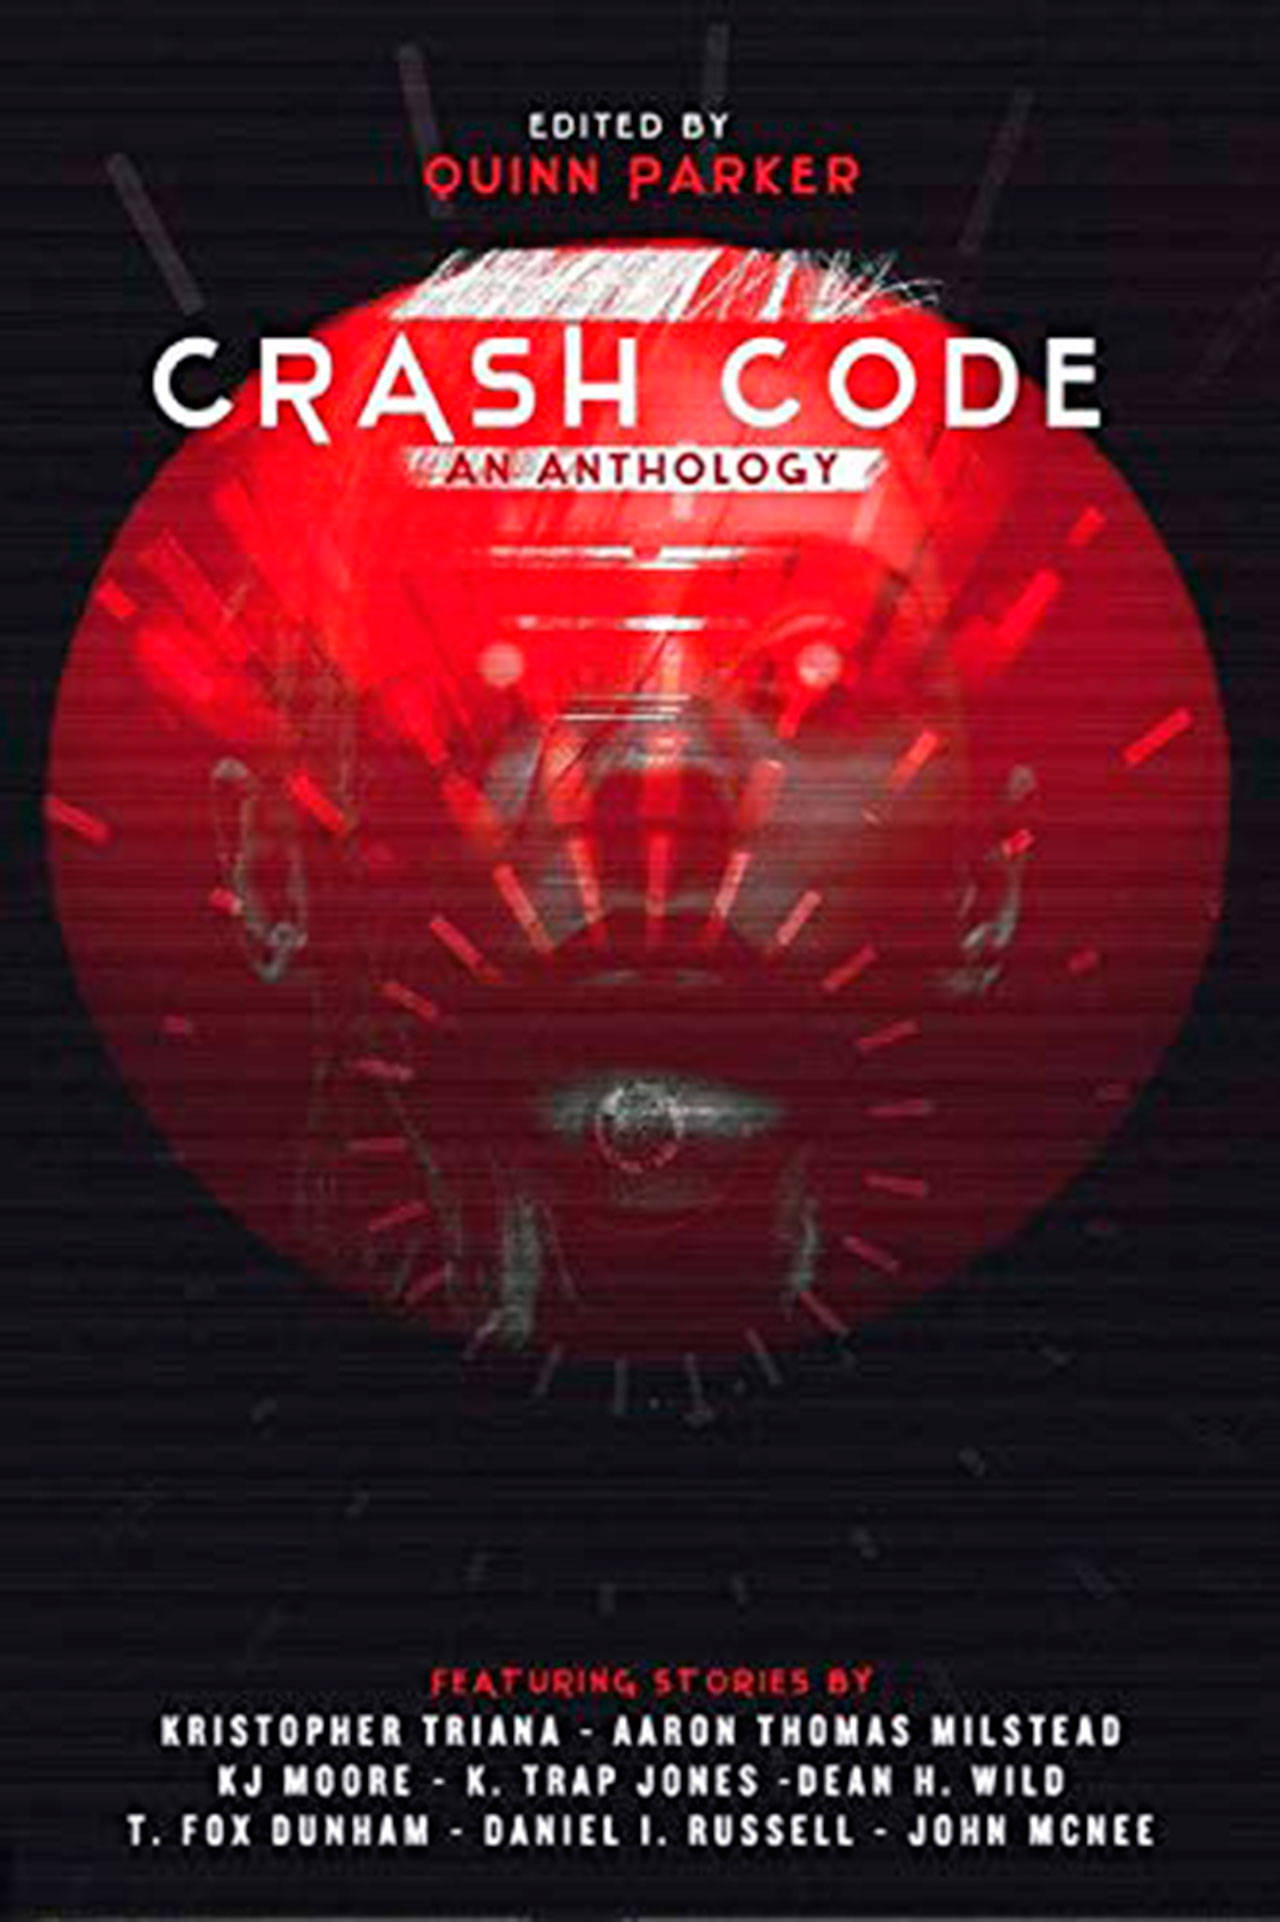 Image courtesy of Blood Bound Books | Bainbridge author Luciano Marano’s latest work of short fiction is one of 27 tales included in the recently released anthology “Crash Code,” a collection of cyberpunk horror stories edited by Q. Parker.